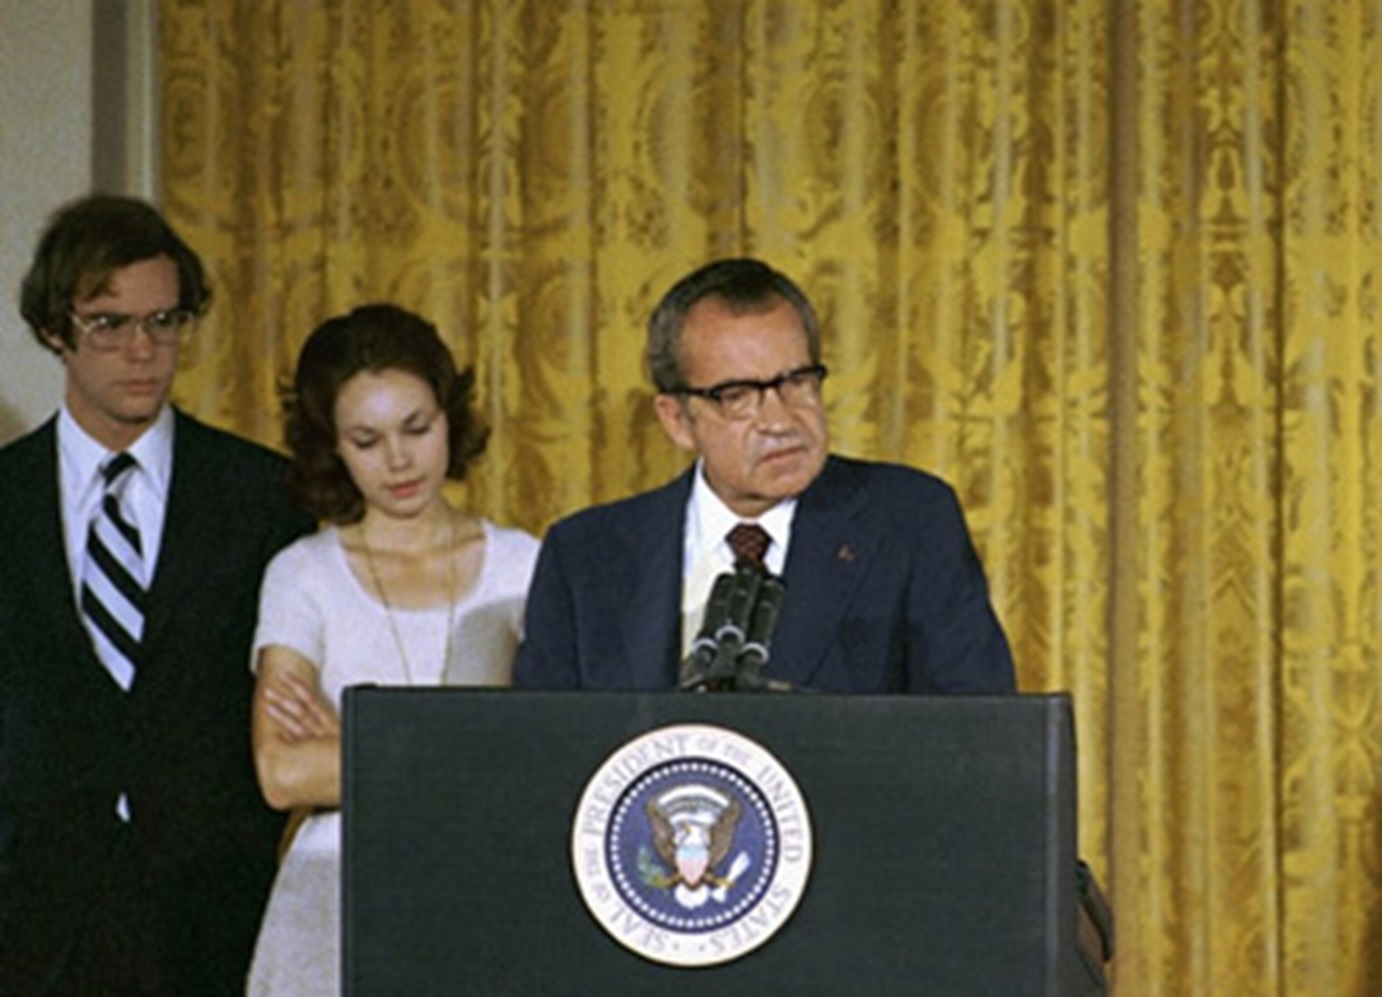 <p>President Nixon's famous denial, "I am not a crook," during a press briefing in 1973, was a response to questions about Watergate. Despite his efforts to distance himself, further investigations revealed his involvement. Aside from its cultural significance, the quote also served as a reminder that even U.S. presidents need to be held accountable.</p>